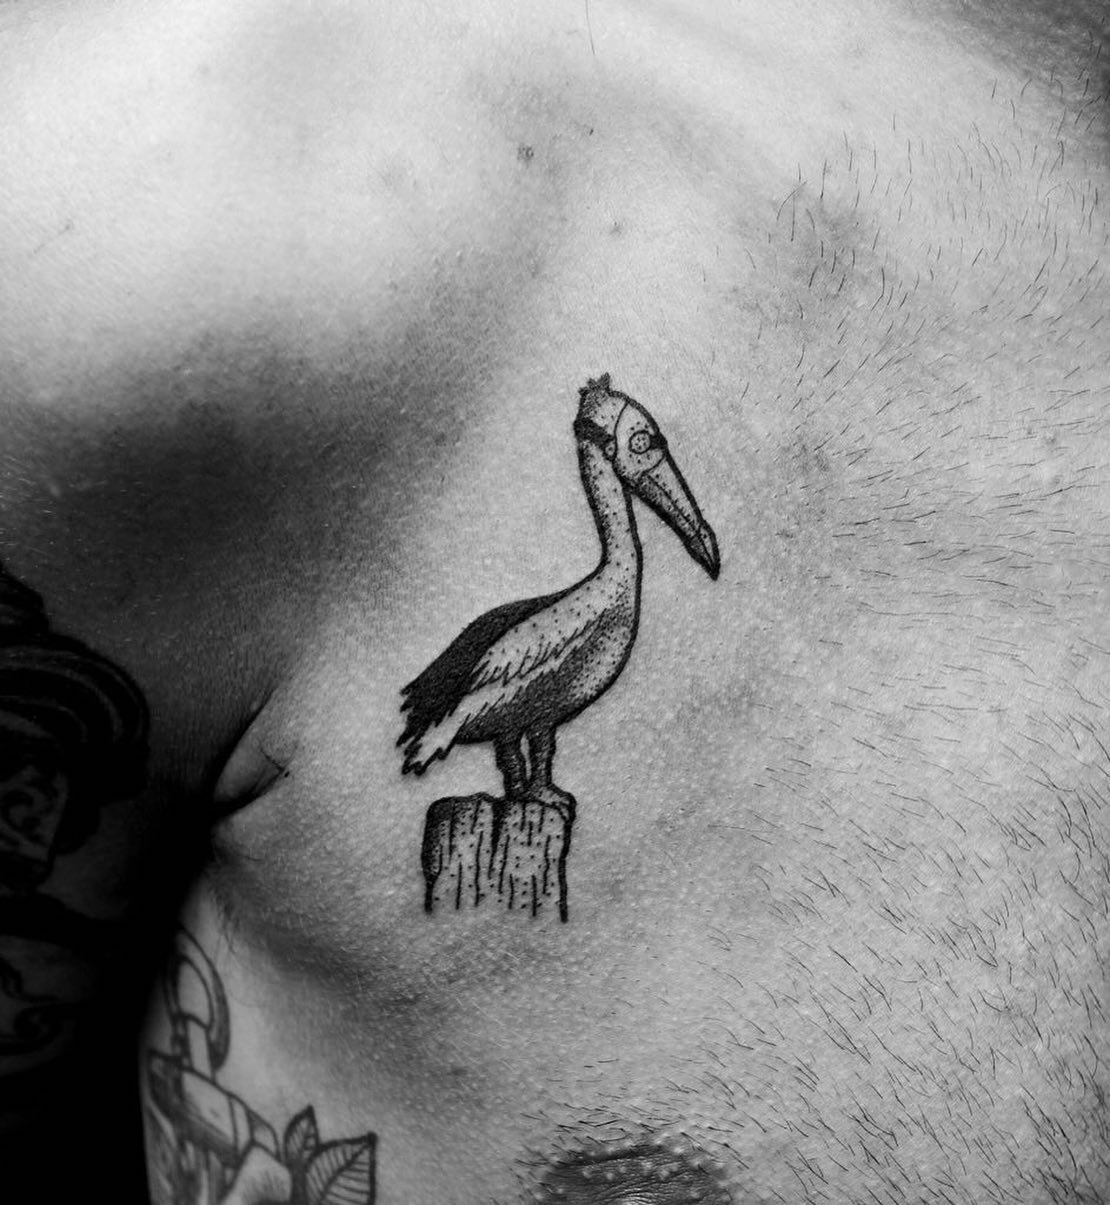 A plague pelican for #TatTuesday this week, cause I finished watching the @fallout TV show and a whole plethora of disaster scenarios are on my mind 😅
Tattooed in Berlin, 2016.
&bull;
&bull;
&bull;
#amgtattoo #dotworktattoo #blackworknow #tattoocoll